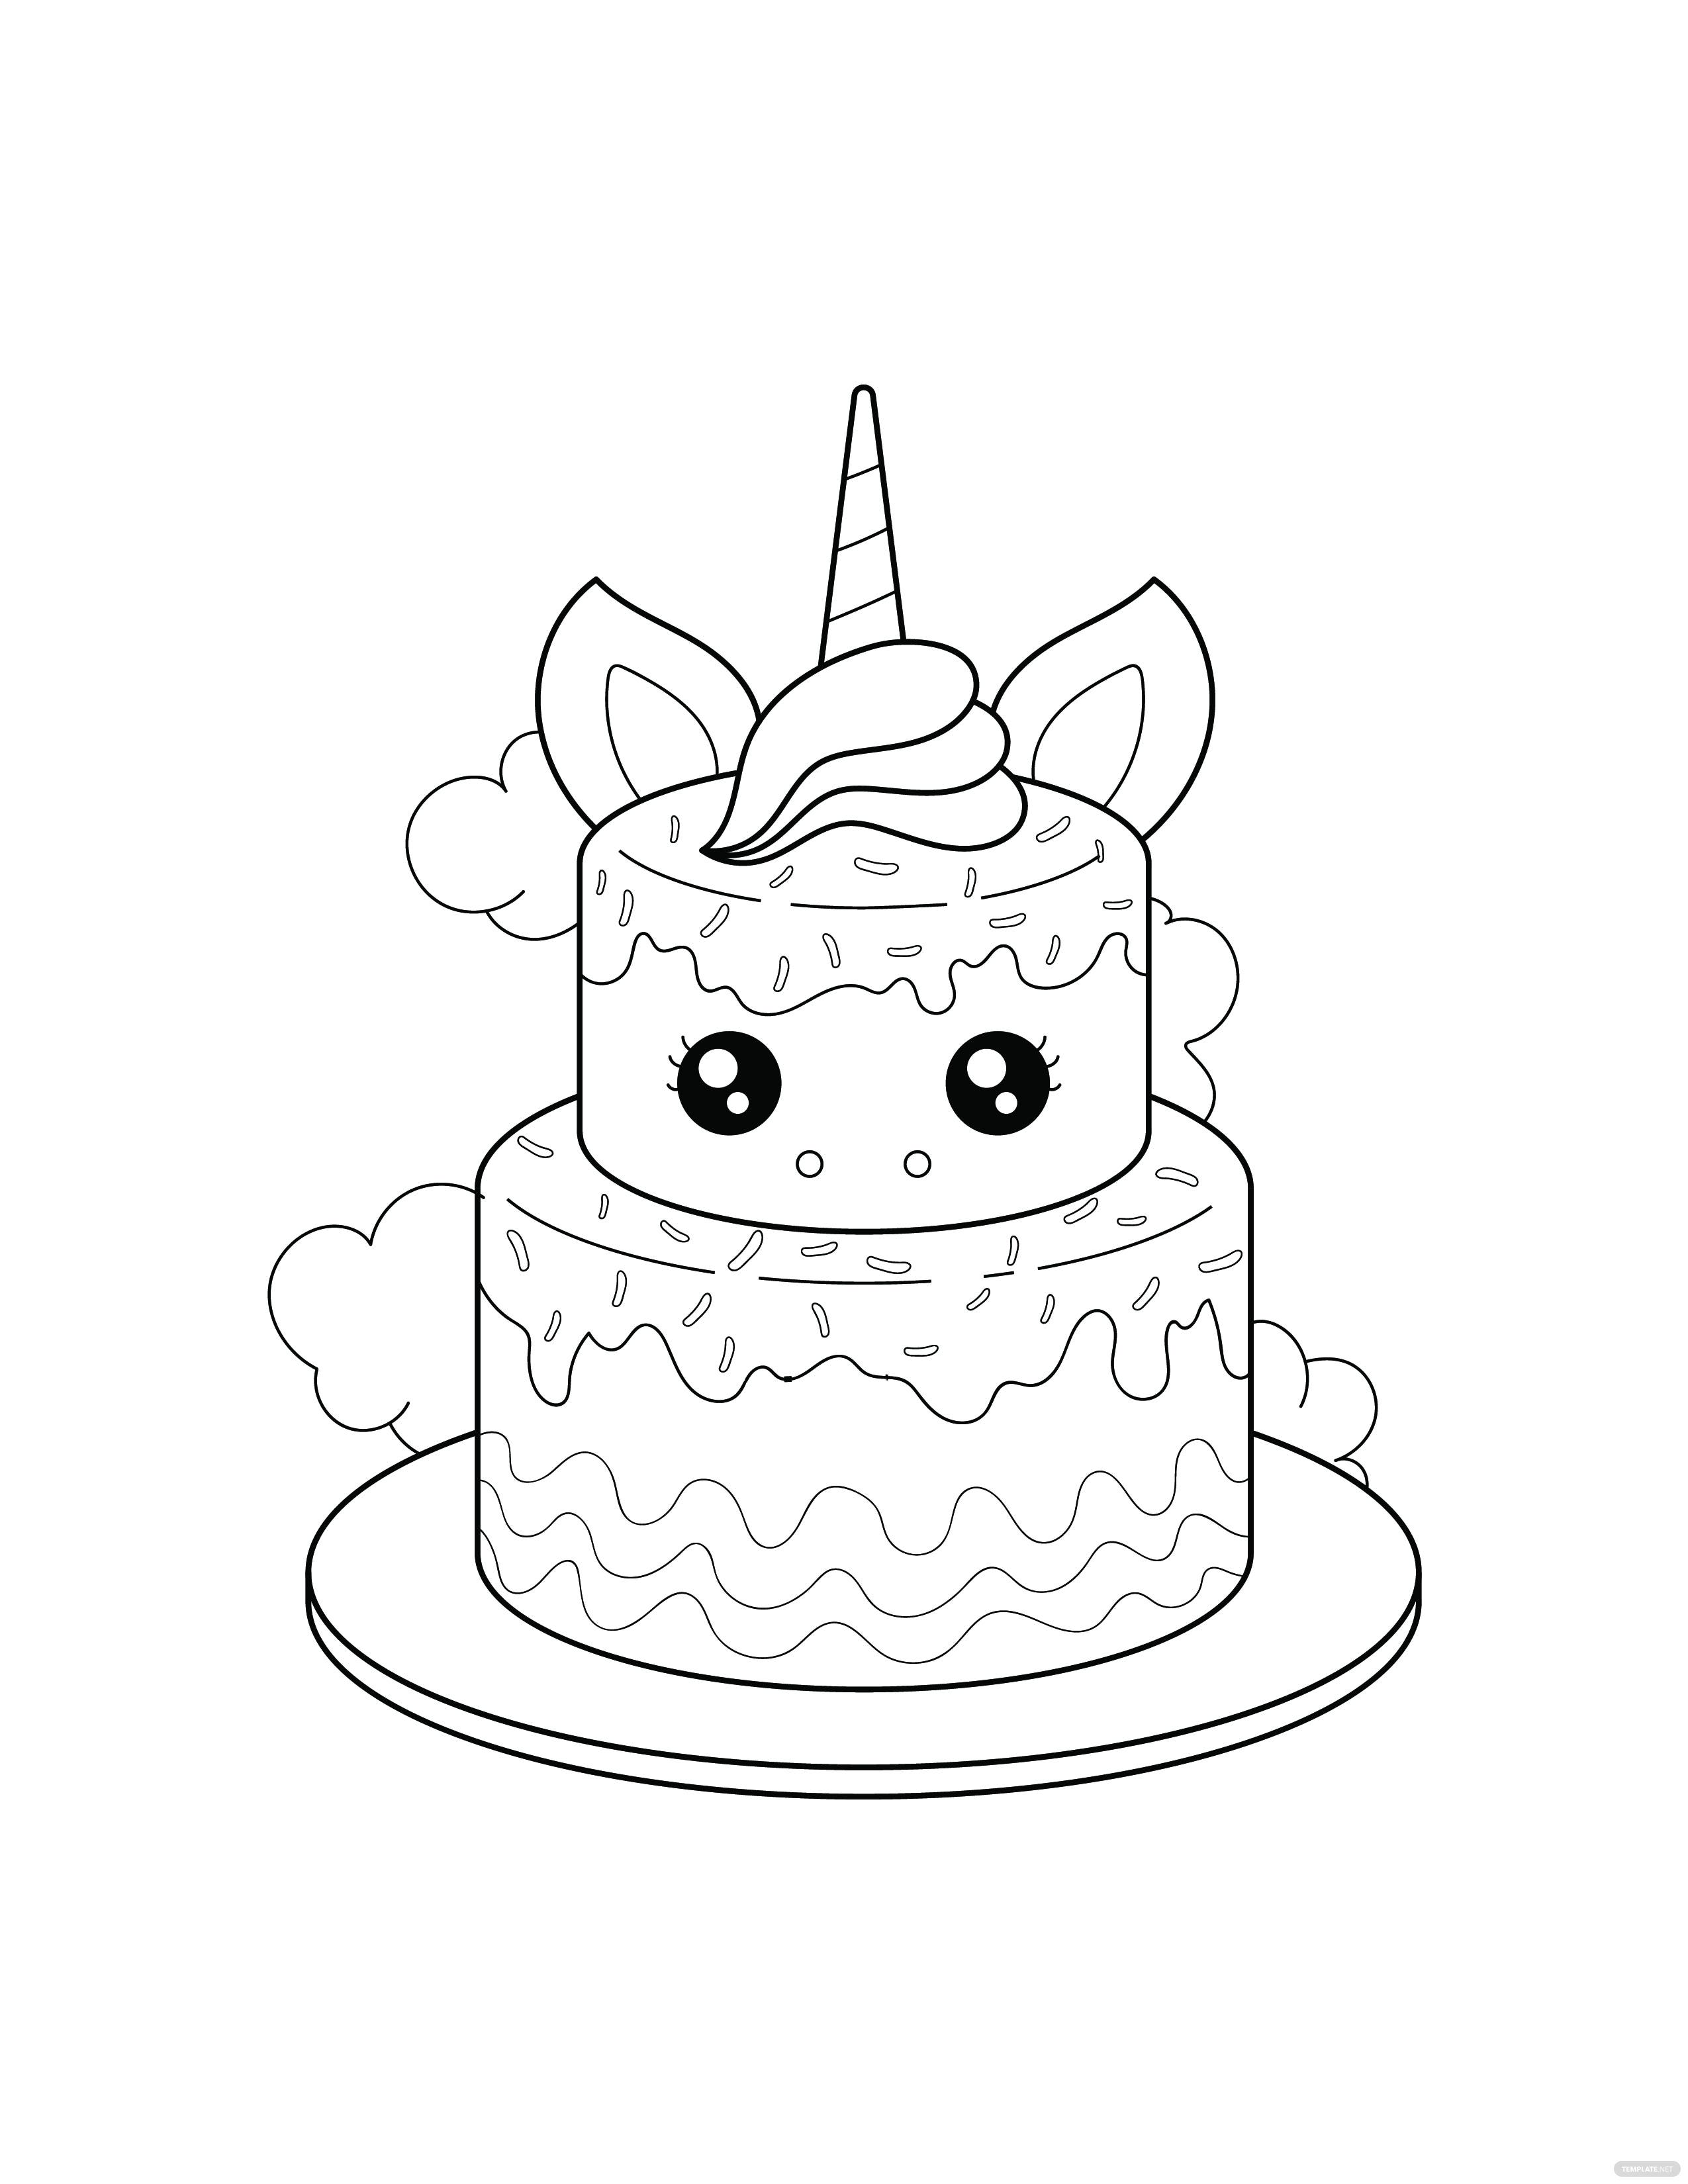 Unicorn Coloring Pages - Free, Printable, Download | Template.net